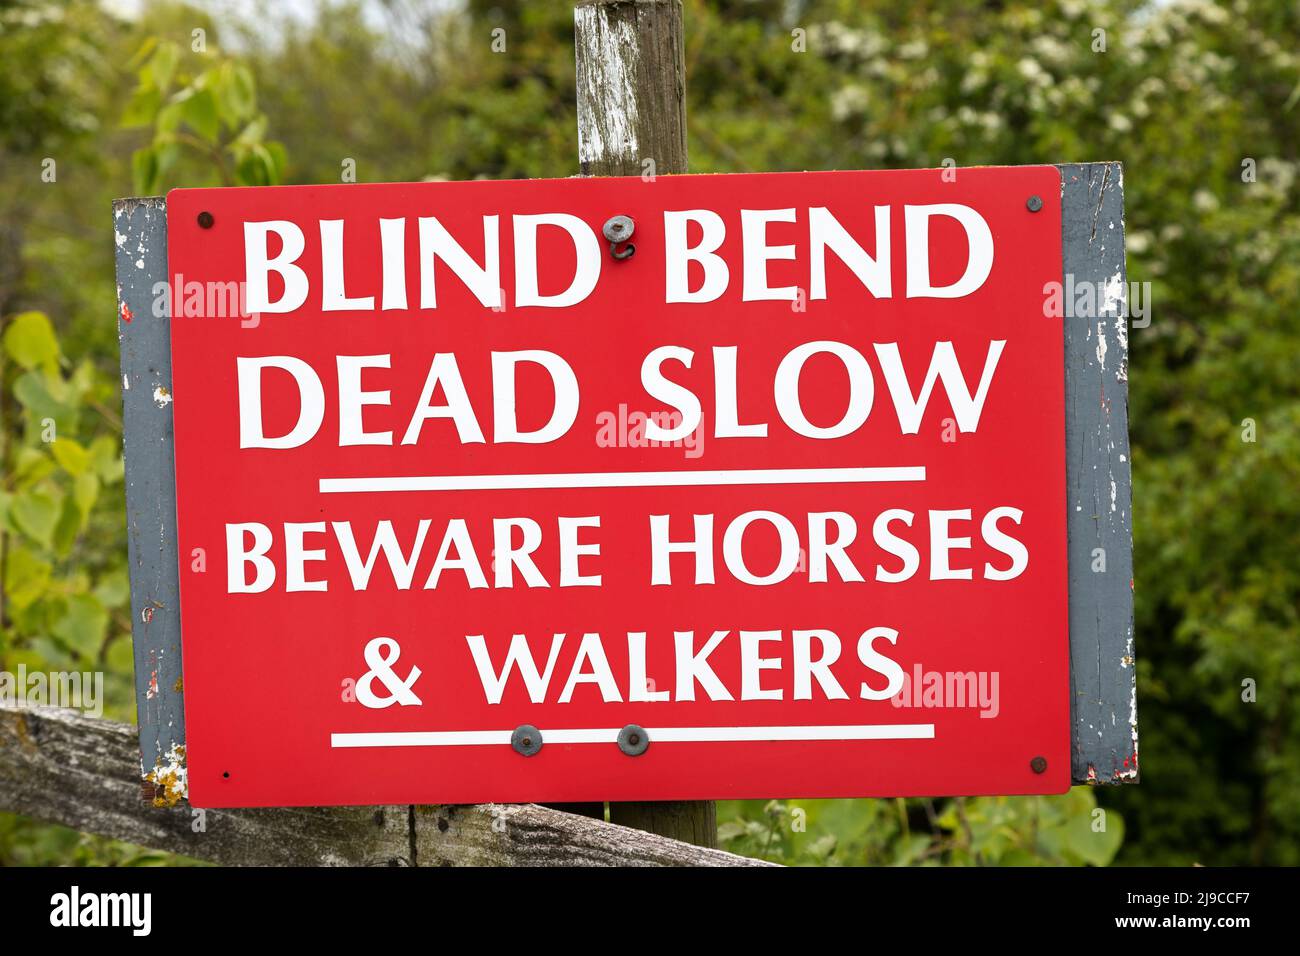 'Blind Bend, Dead Slow' reads a sign in Sunderland, England. It warns people to beware of horses and walkers. Stock Photo